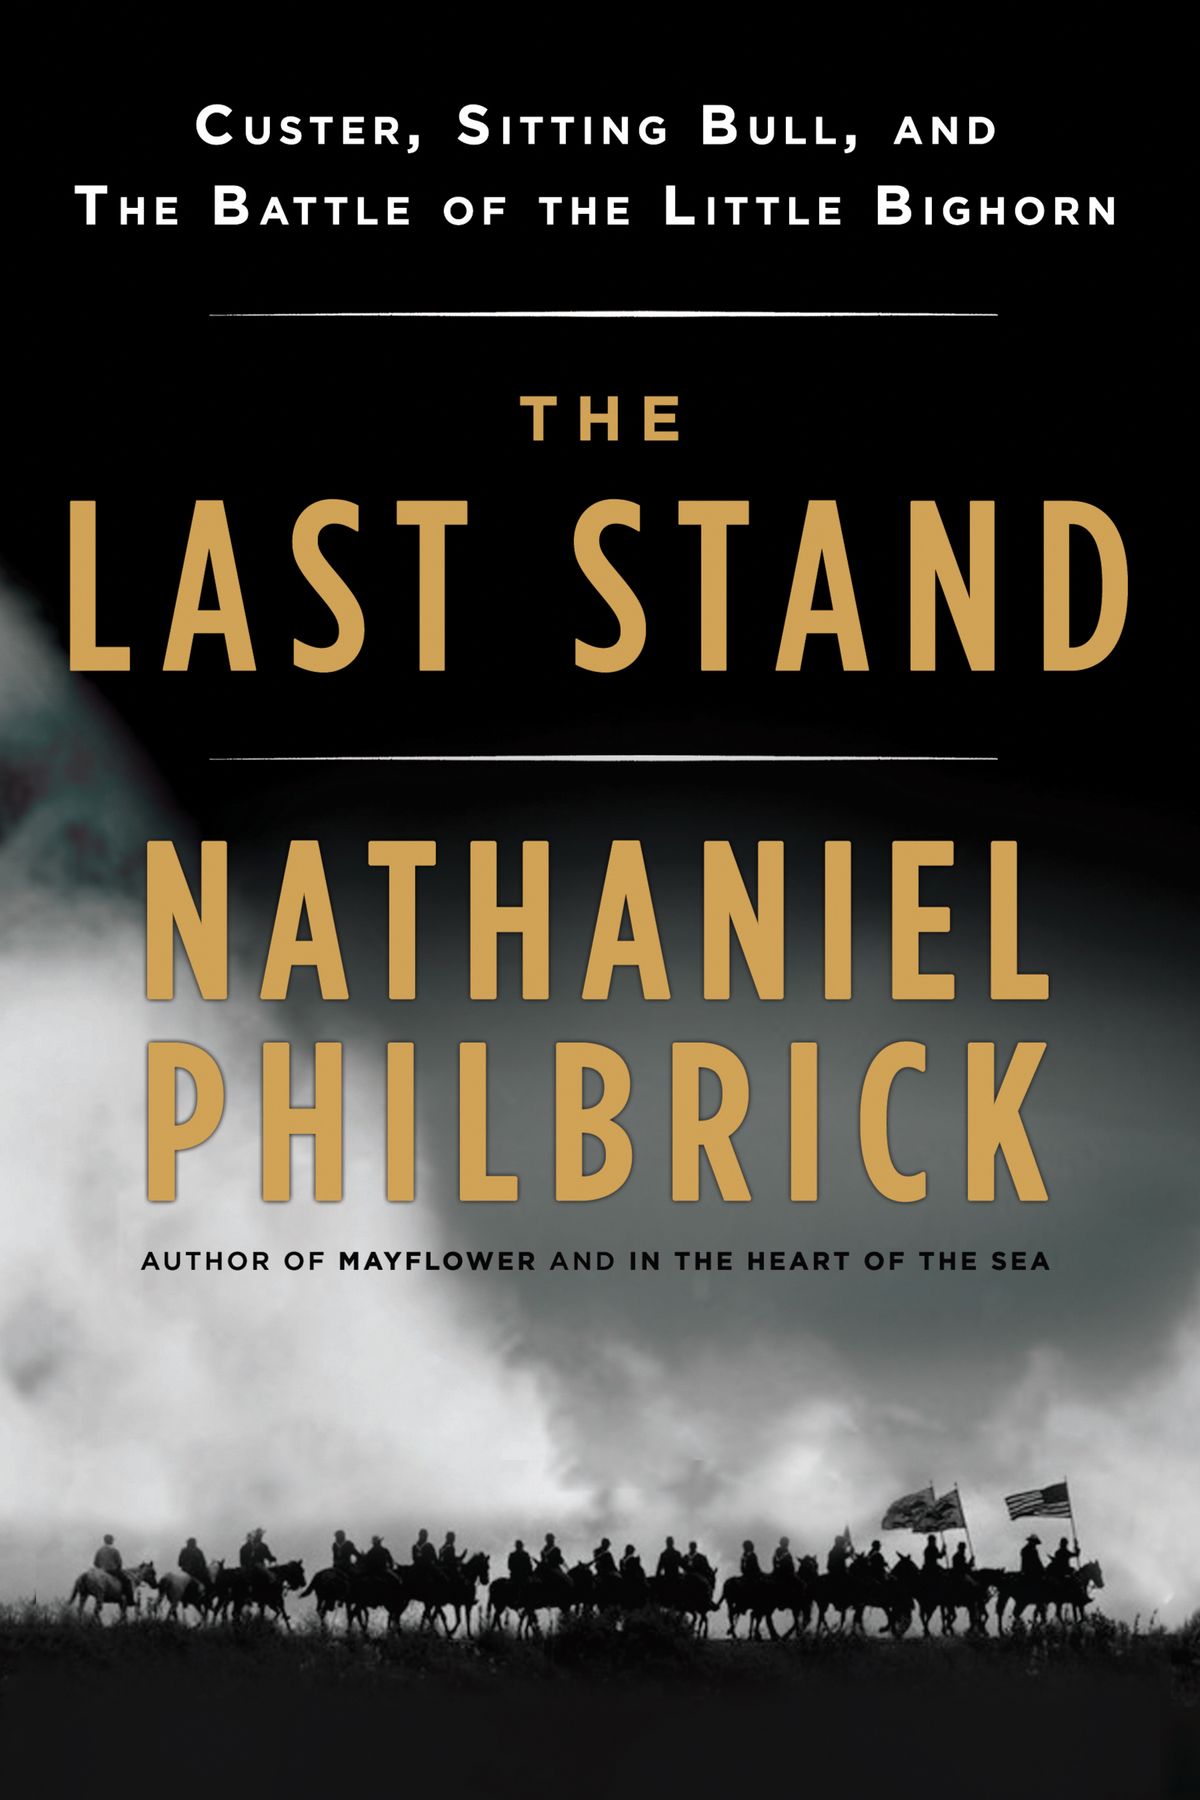 The Last Stand, by Nathaniel Philbrick